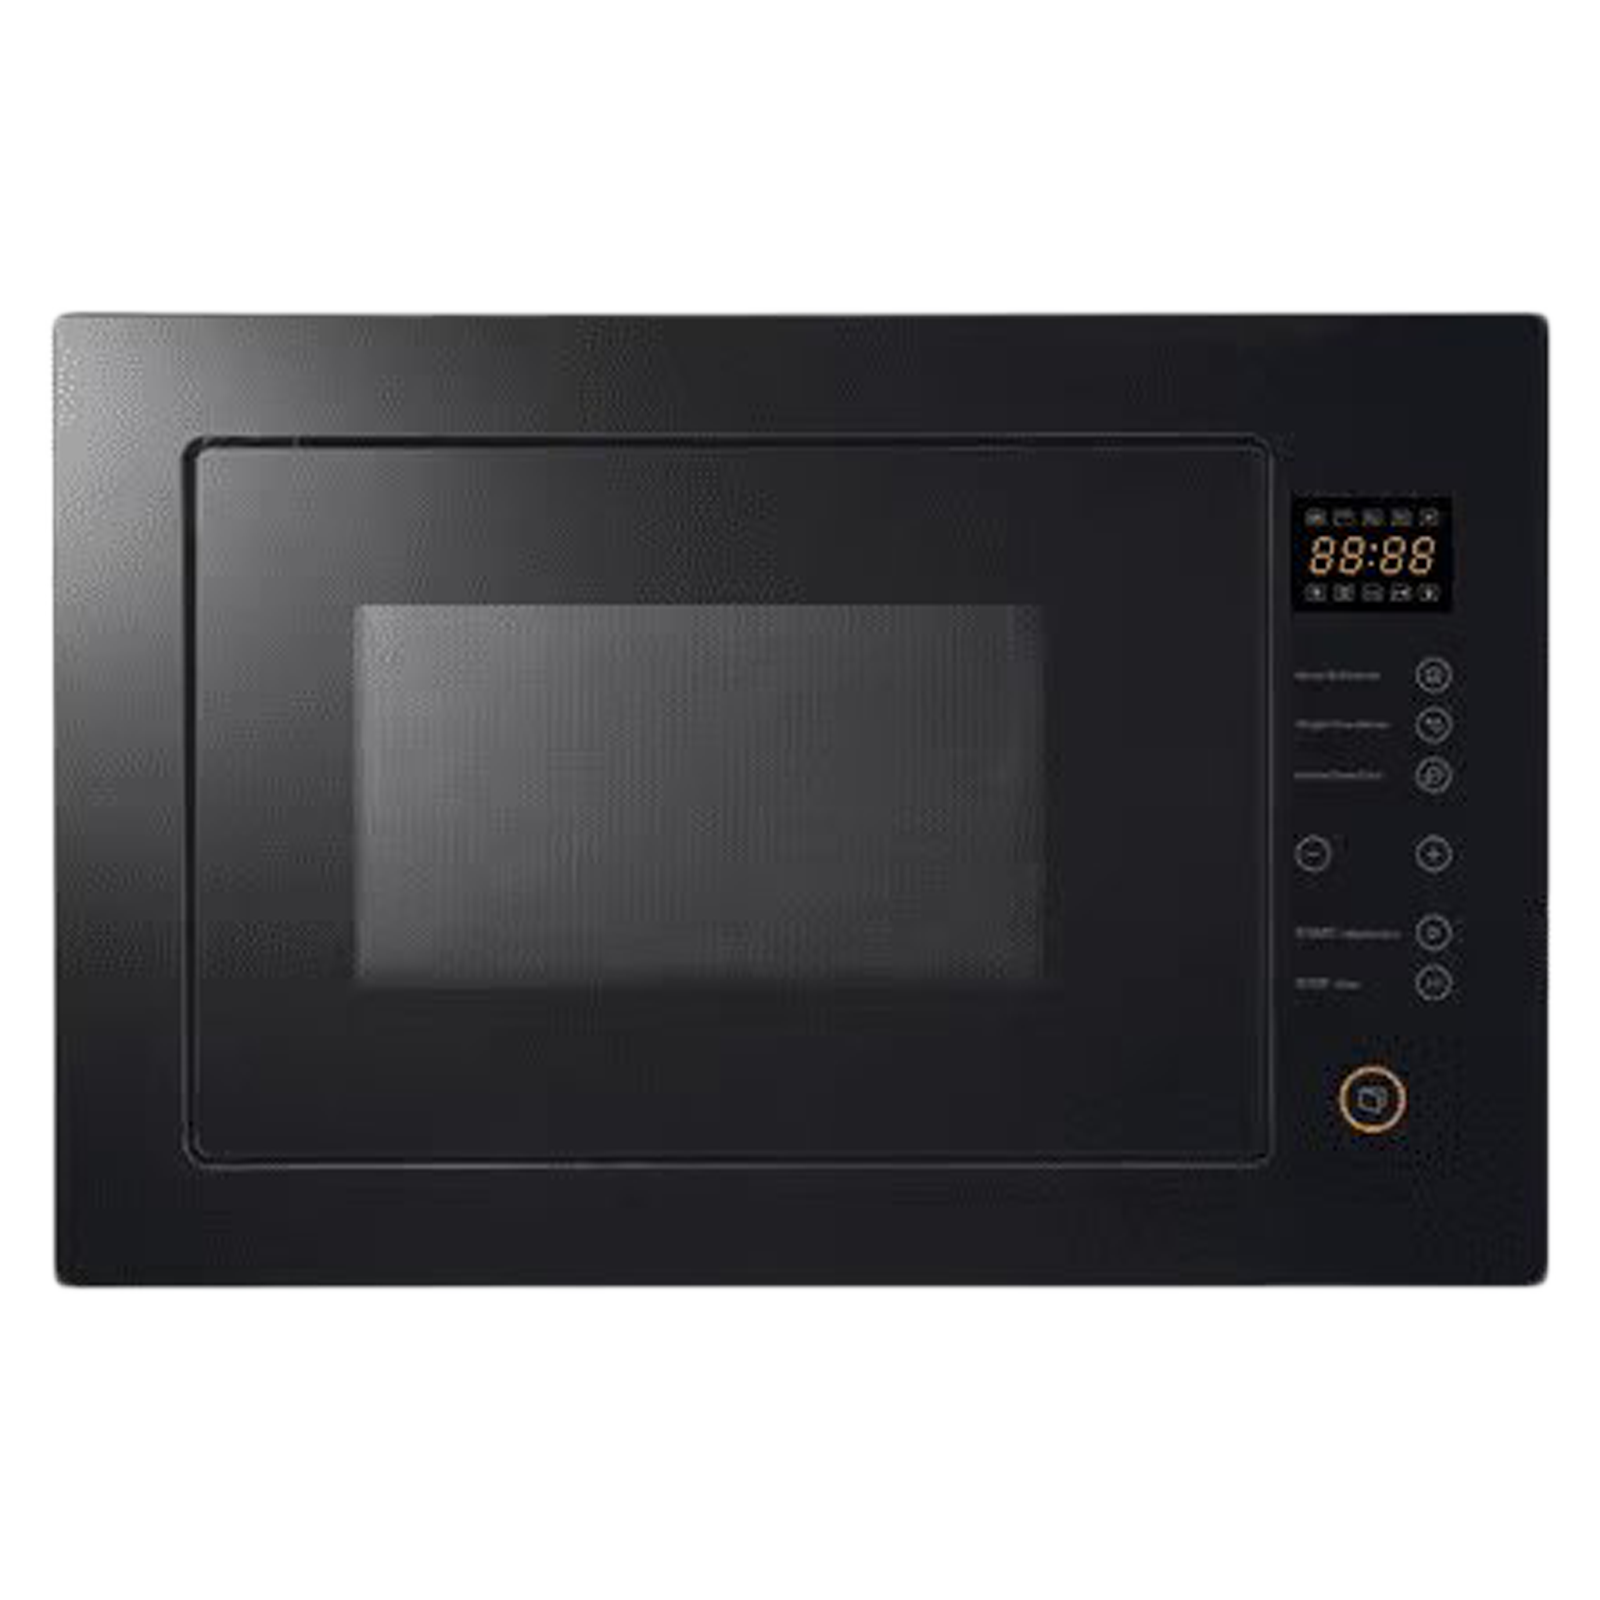 Crompton GrandArt 25 Litres Convection Microwave Oven (Thermostat Heating Element, MWO-GACON25L--MBL, Midnight Black)_1